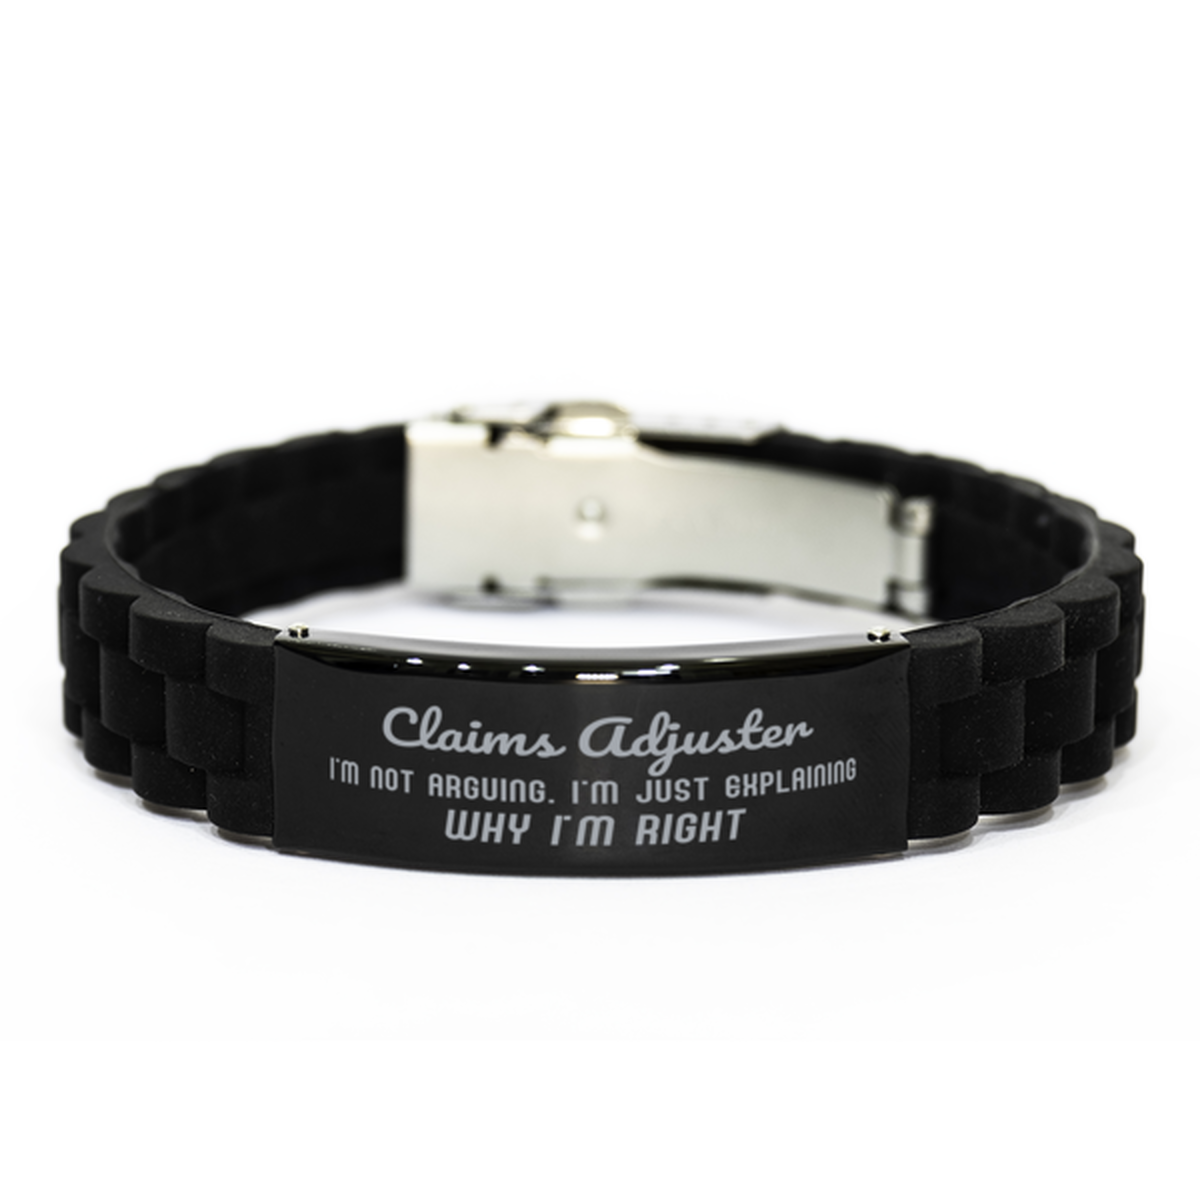 Claims Adjuster I'm not Arguing. I'm Just Explaining Why I'm RIGHT Black Glidelock Clasp Bracelet, Funny Saying Quote Claims Adjuster Gifts For Claims Adjuster Graduation Birthday Christmas Gifts for Men Women Coworker